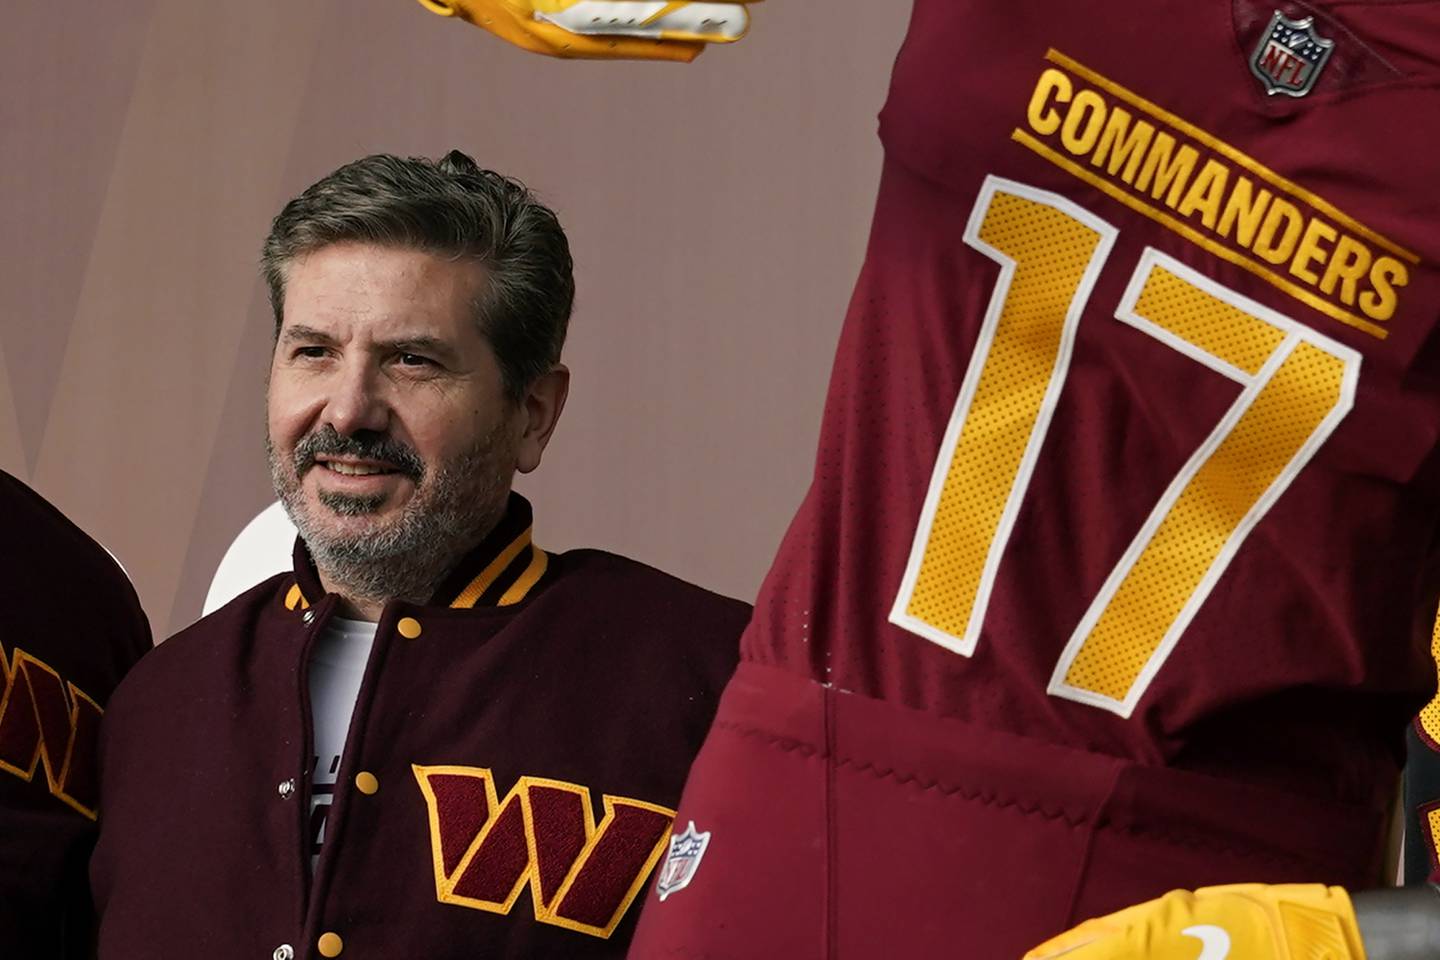 This photo shows Washington Commanders owner Dan Snyder standing near a jersey for the team.